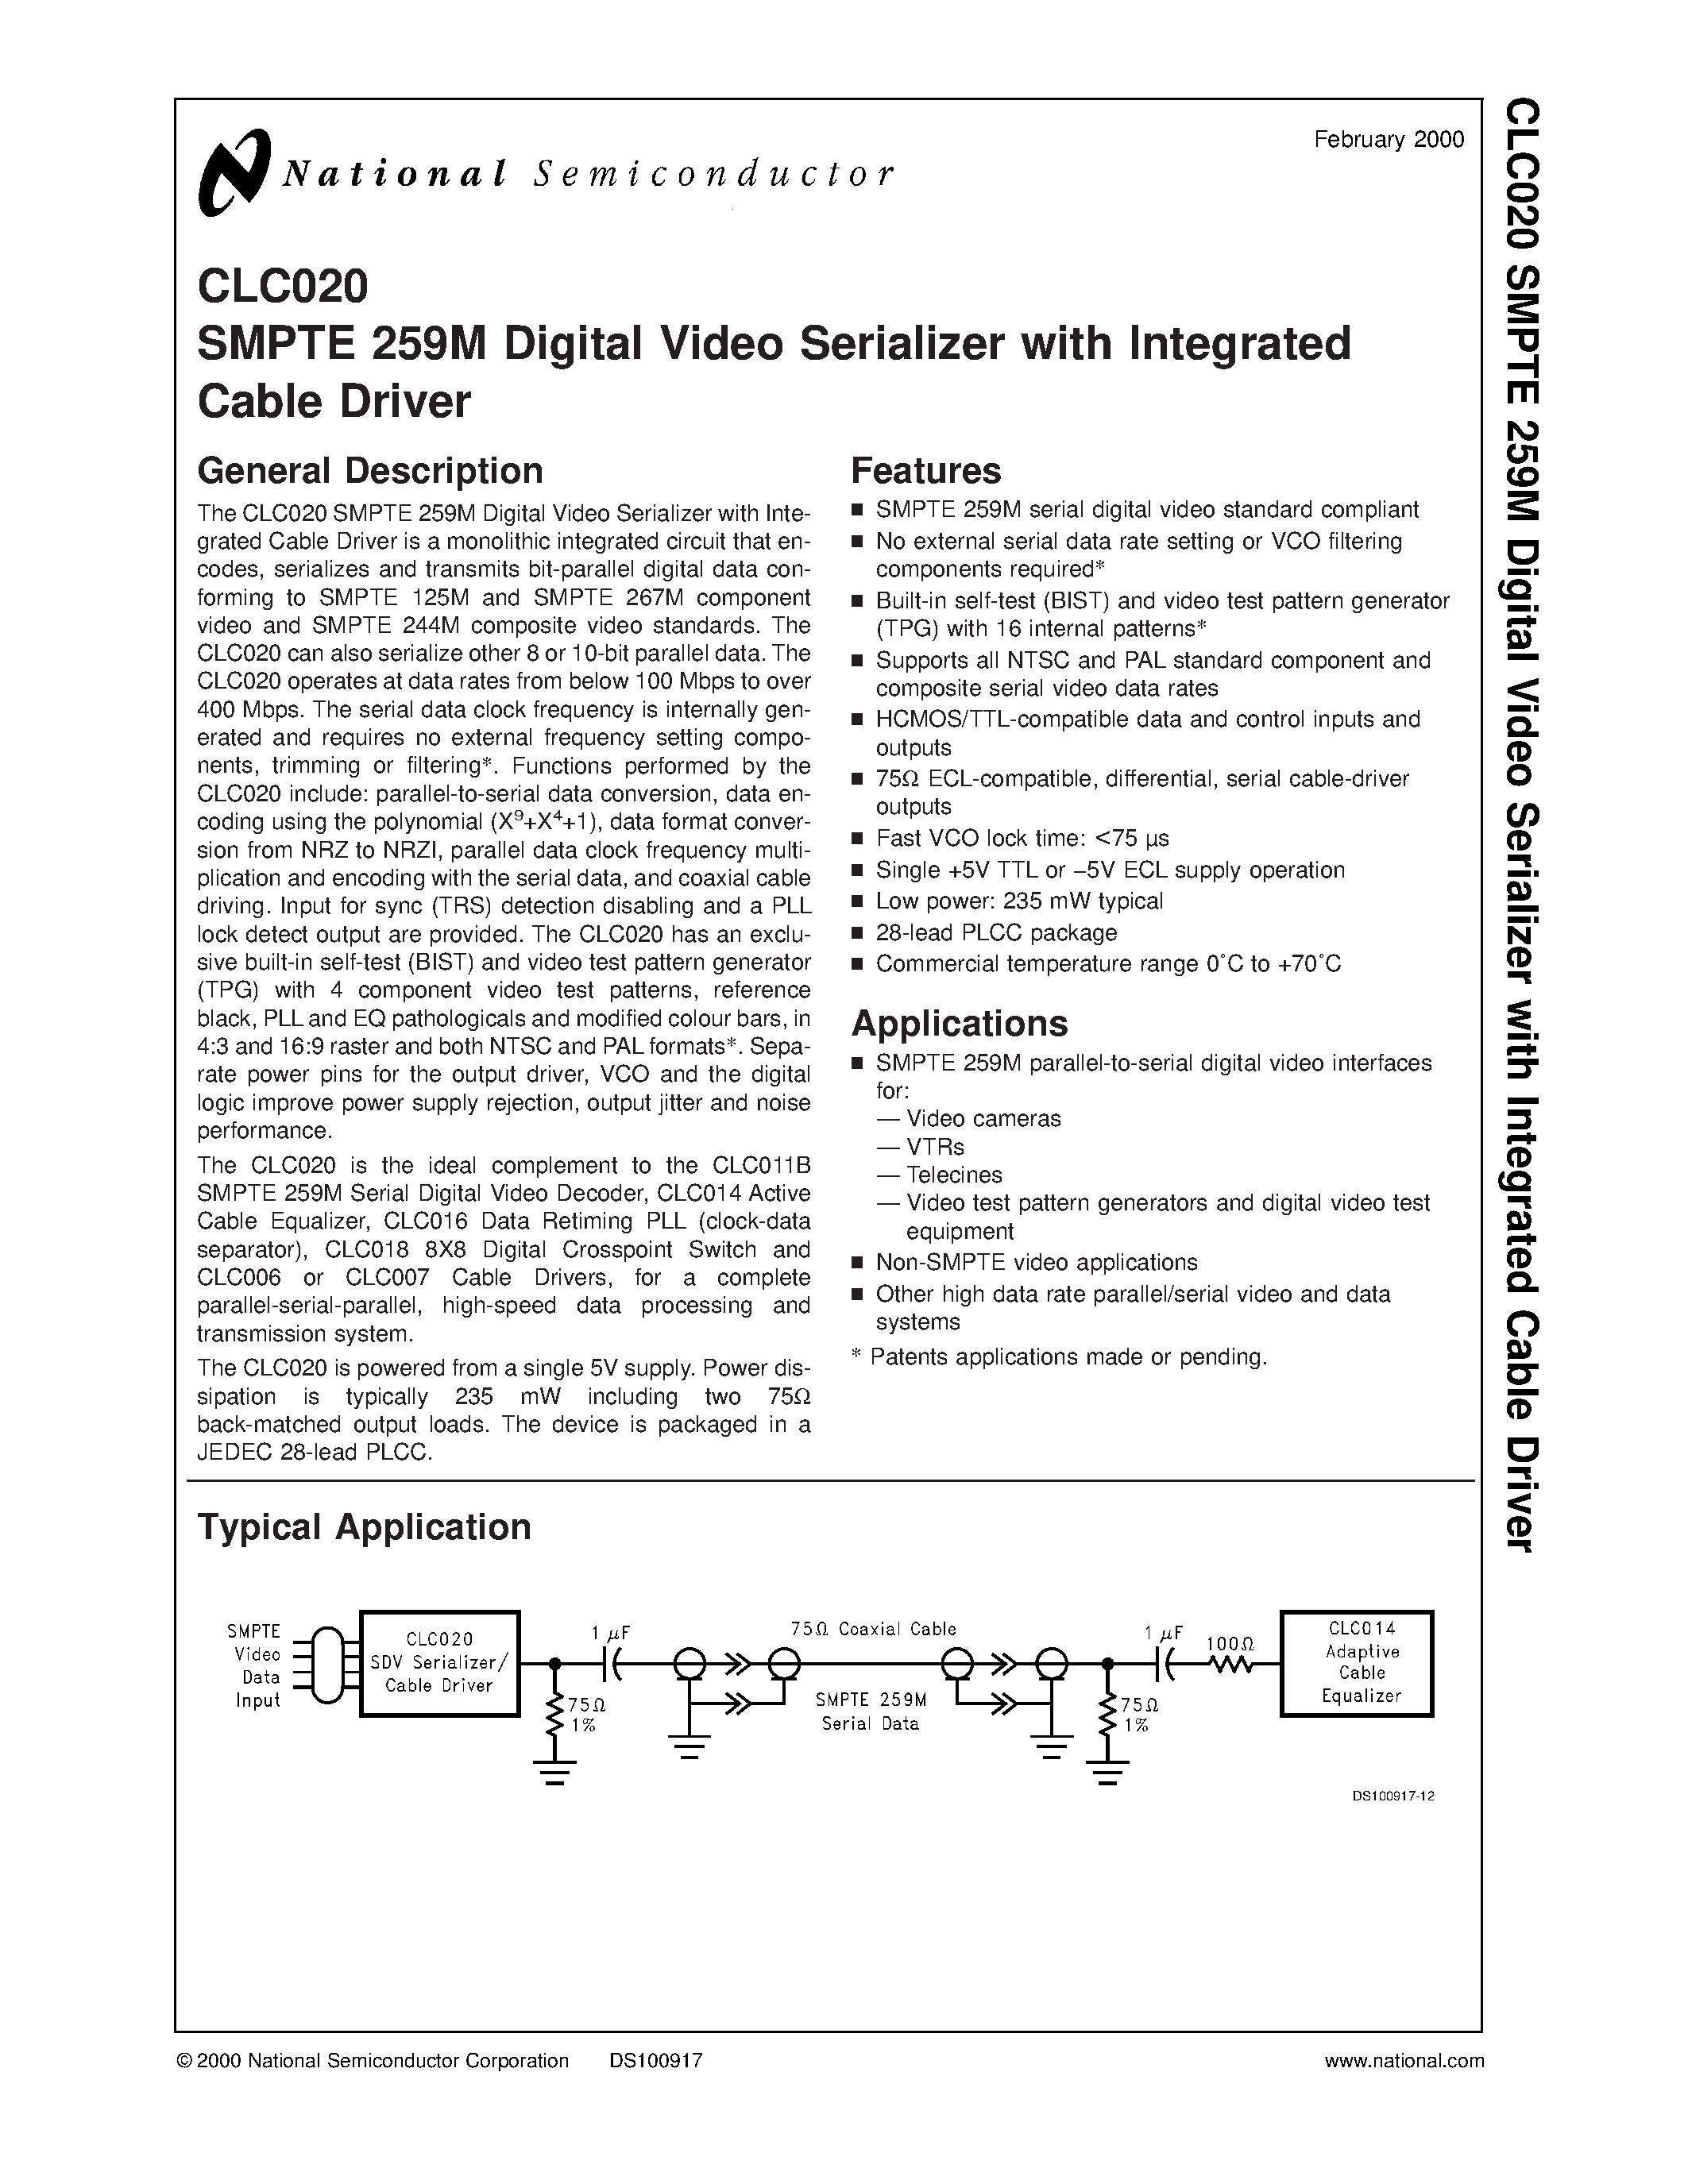 Datasheet CLC020 - SMPTE 259M Digital Video Serializer with Integrated Cable Driver page 1